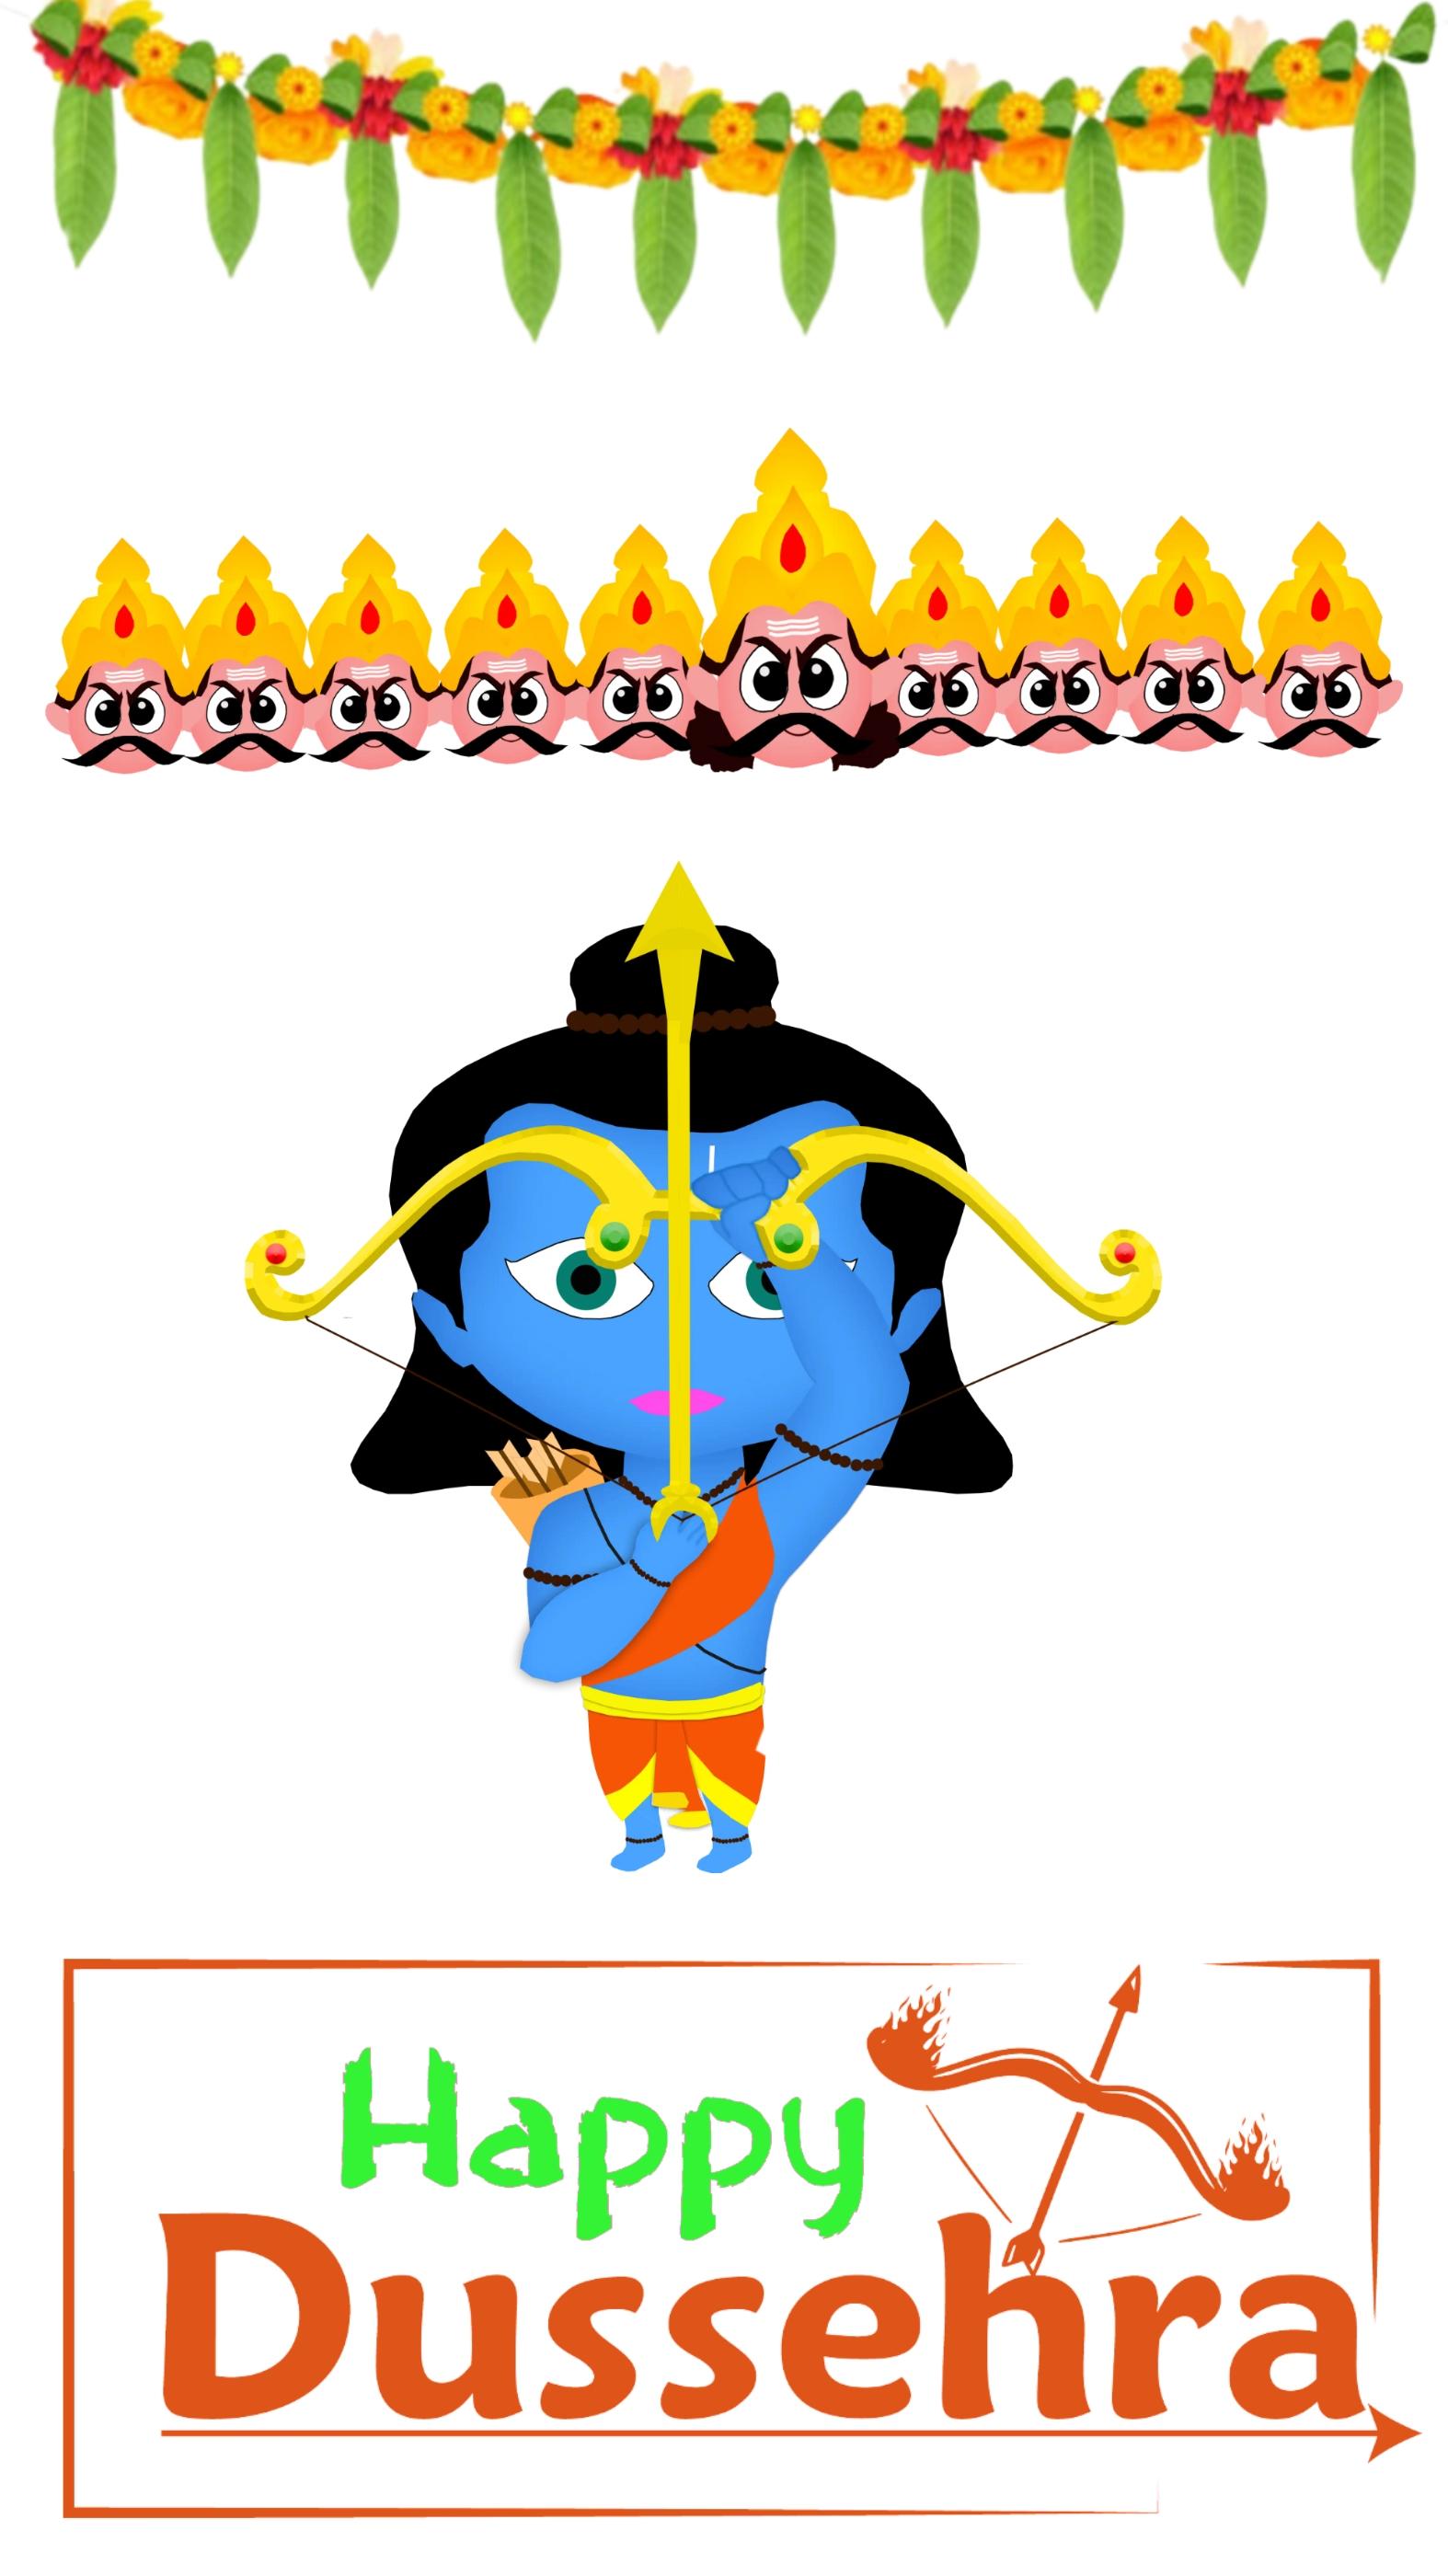 Happy Dussehra Images for Whatsapp and Facebook